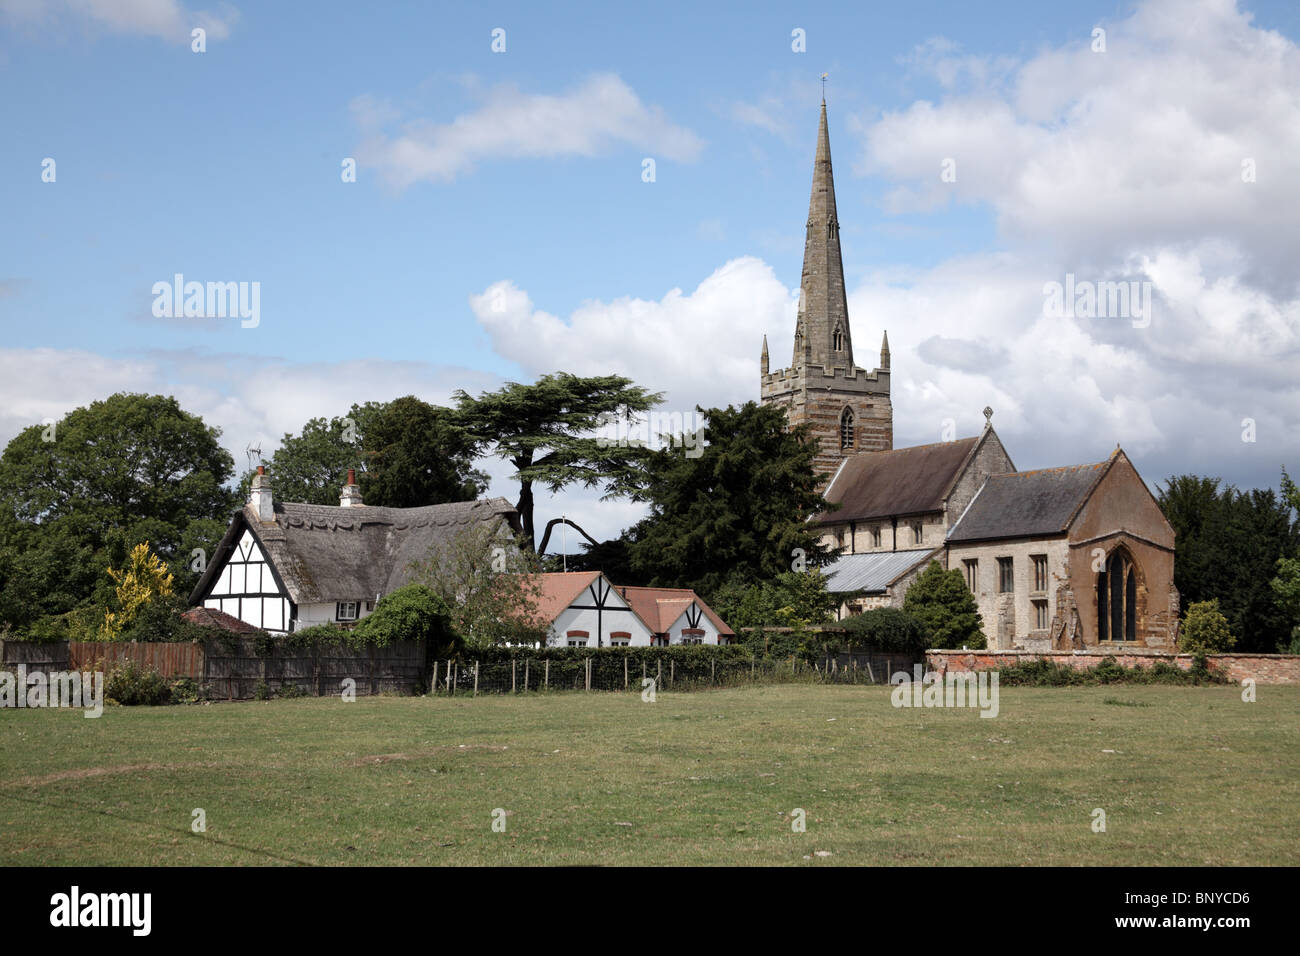 All Saints Church, Ladbroke, Warwickshire; The village is close to the proposed route of the HS2 High Speed Rail Link Stock Photo